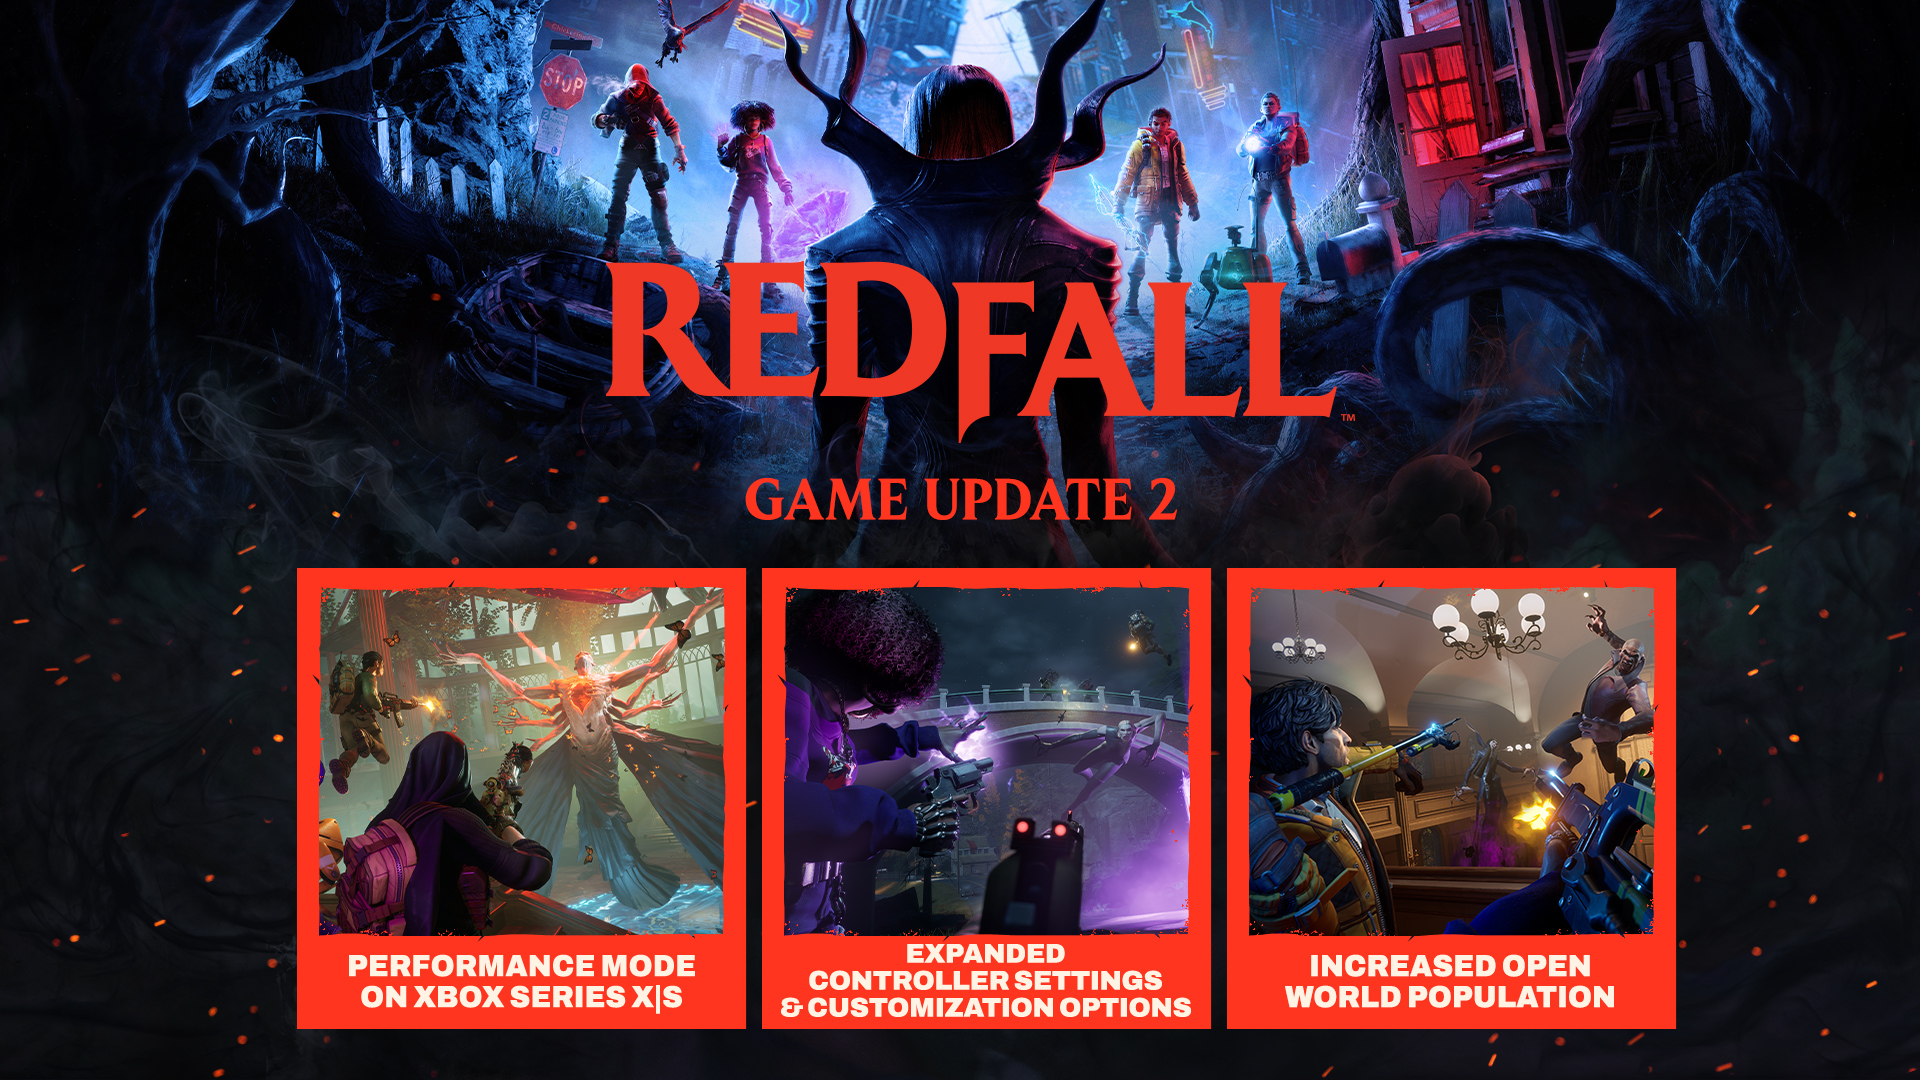 Klobrille on X: Redfall supports full cross play between Xbox +